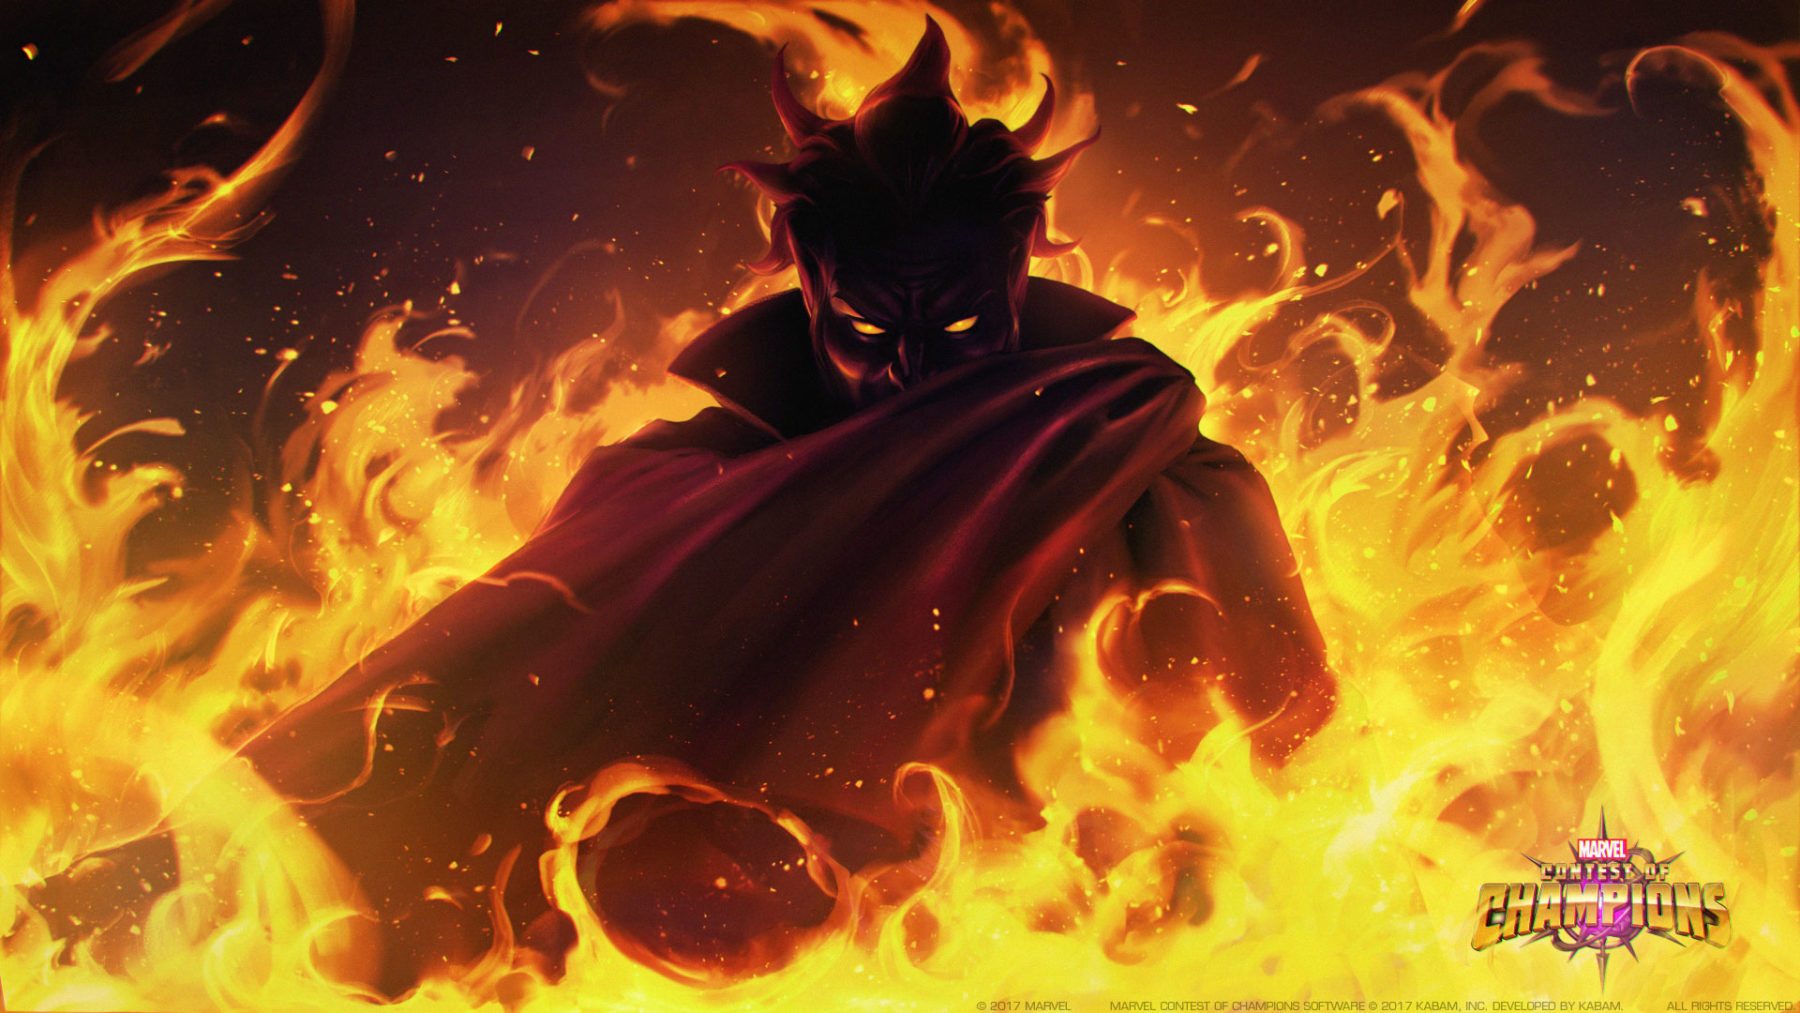 Mephisto comes Marvel: Contest of Champions